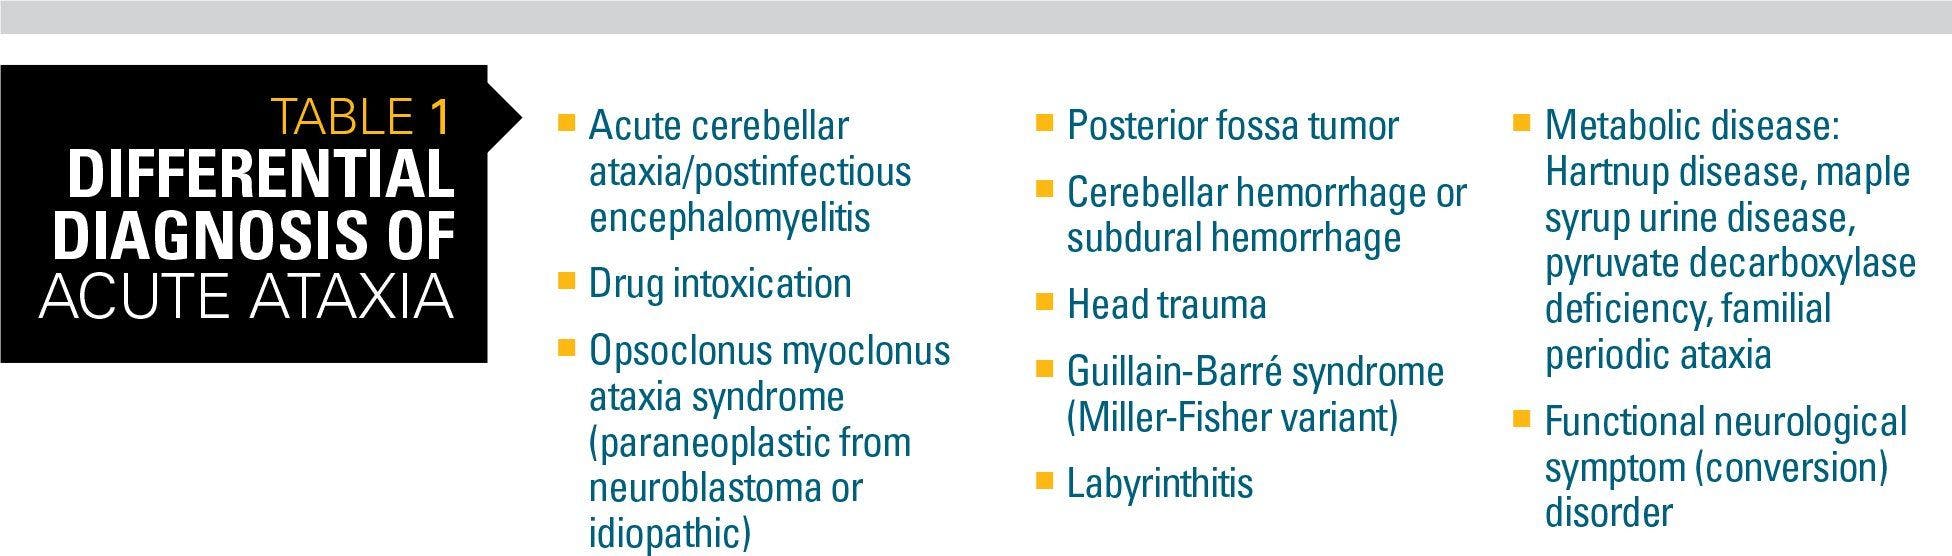 Differential diagnosis of acute ataxia